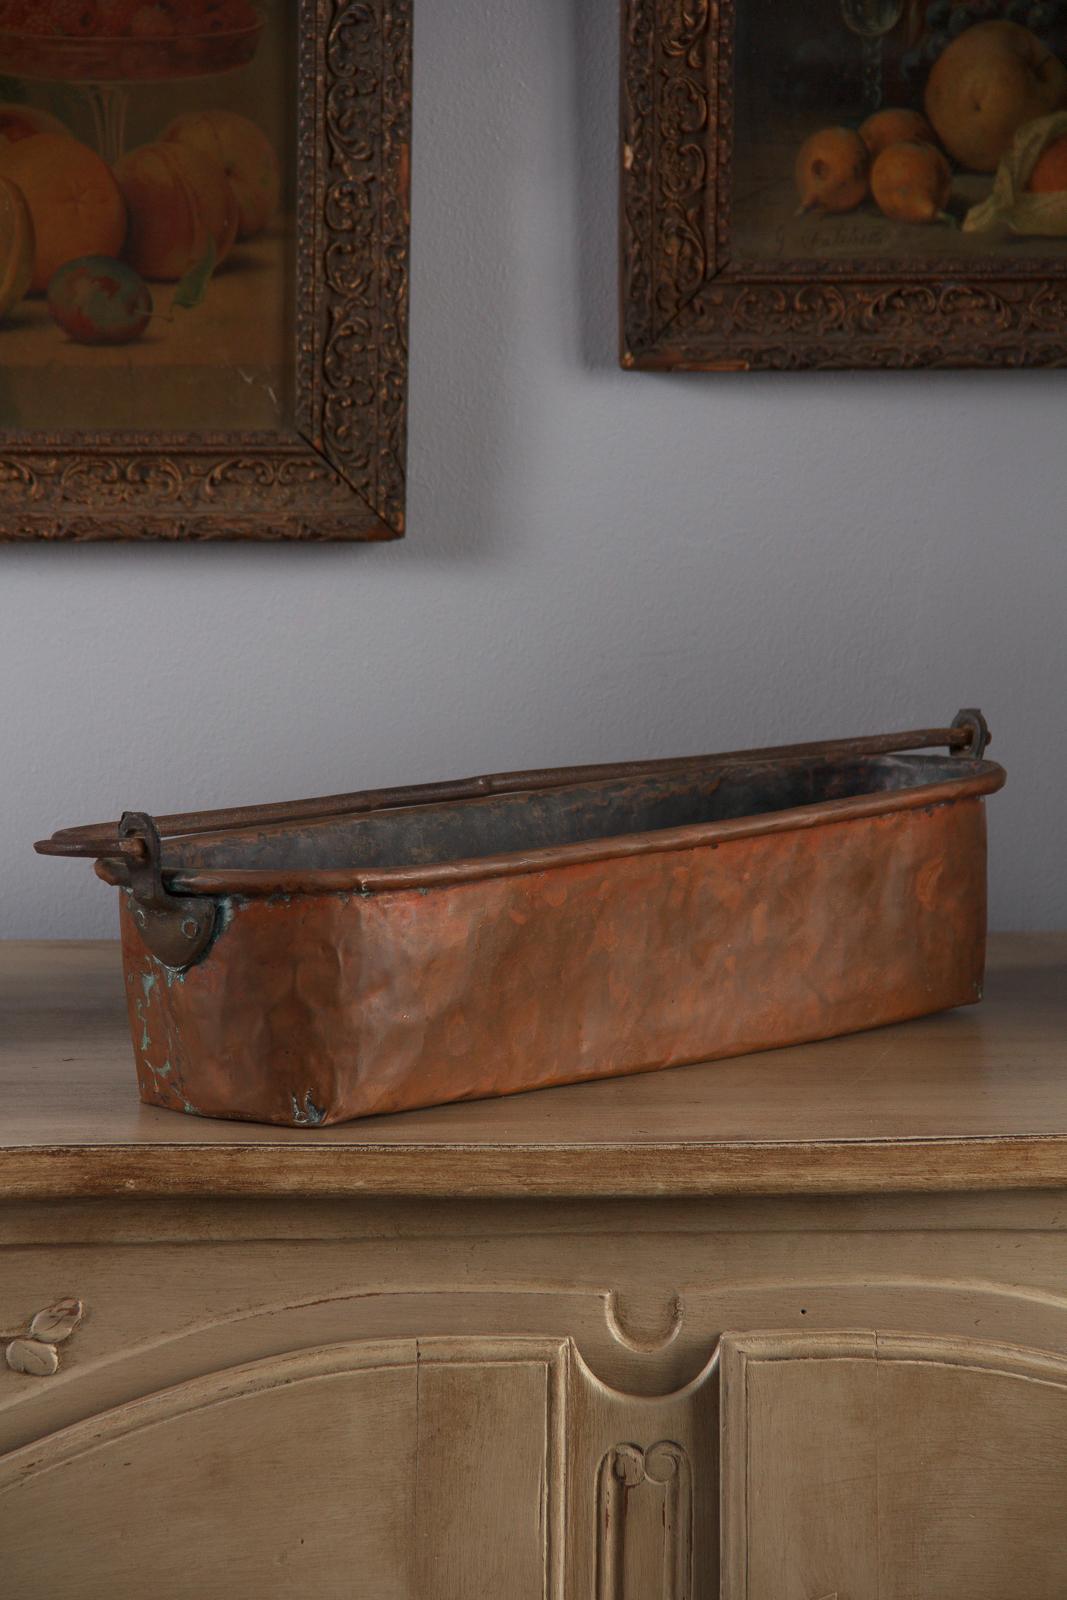 A wonderful rustic copper and iron poissoniere fish kettle from France, 19th century. The hand-hammered and brazed copper trough has a turned over lip which holds an iron rod frame. A swinging wrought iron handle stretches the length of the